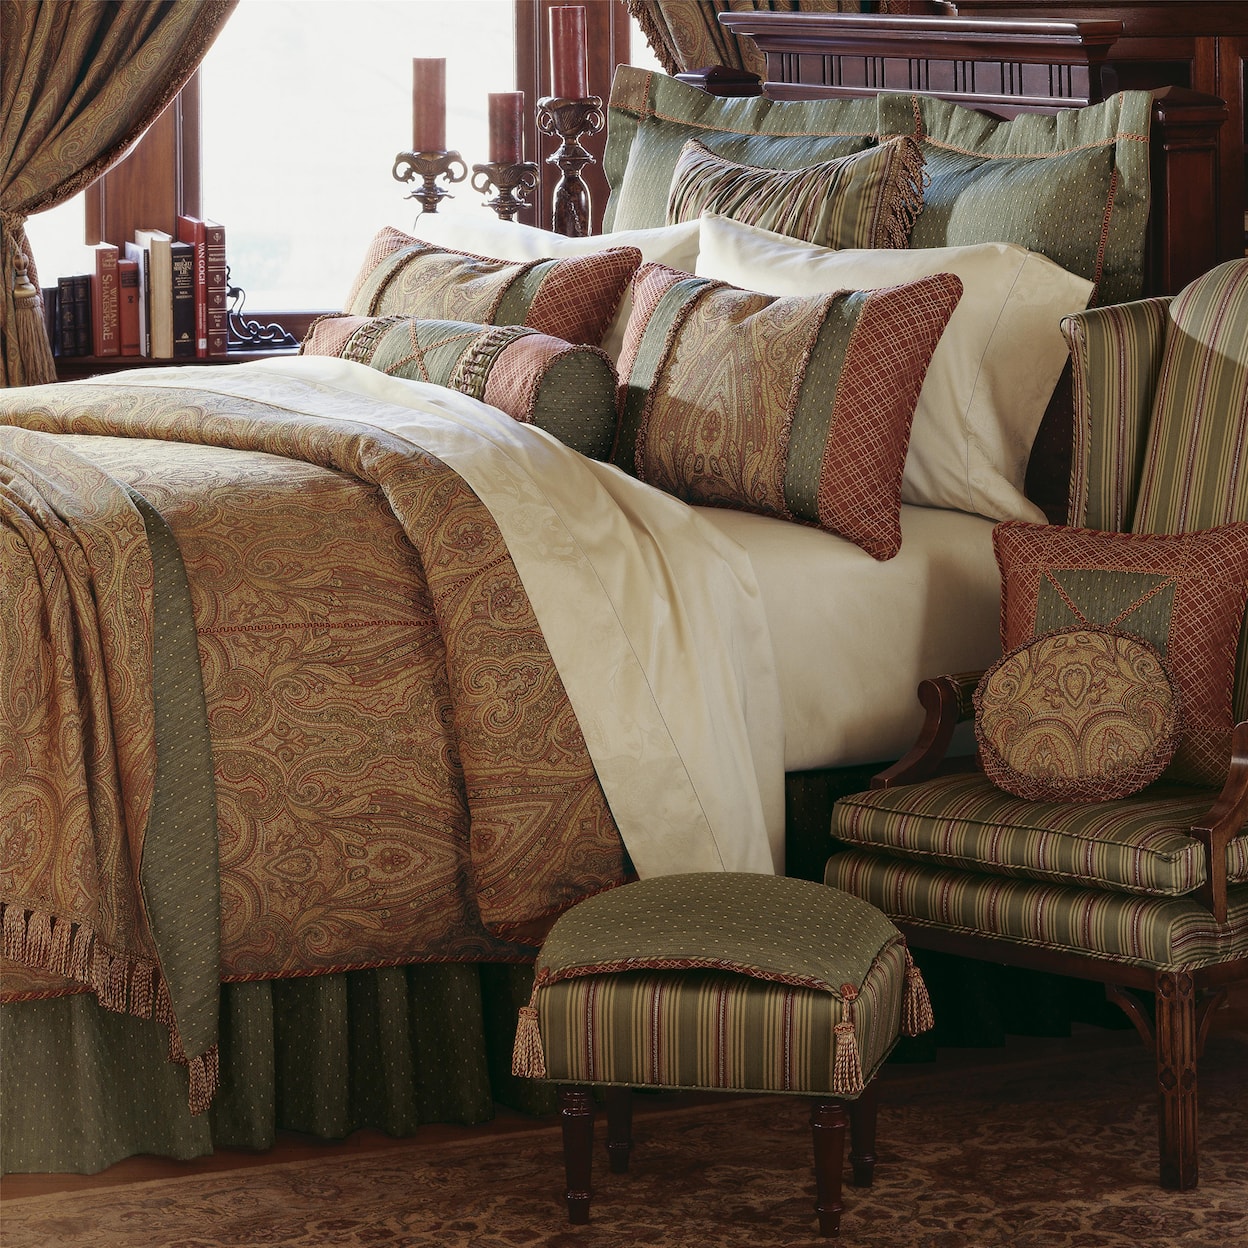 Eastern Accents Glenwood Twin Bed Skirt